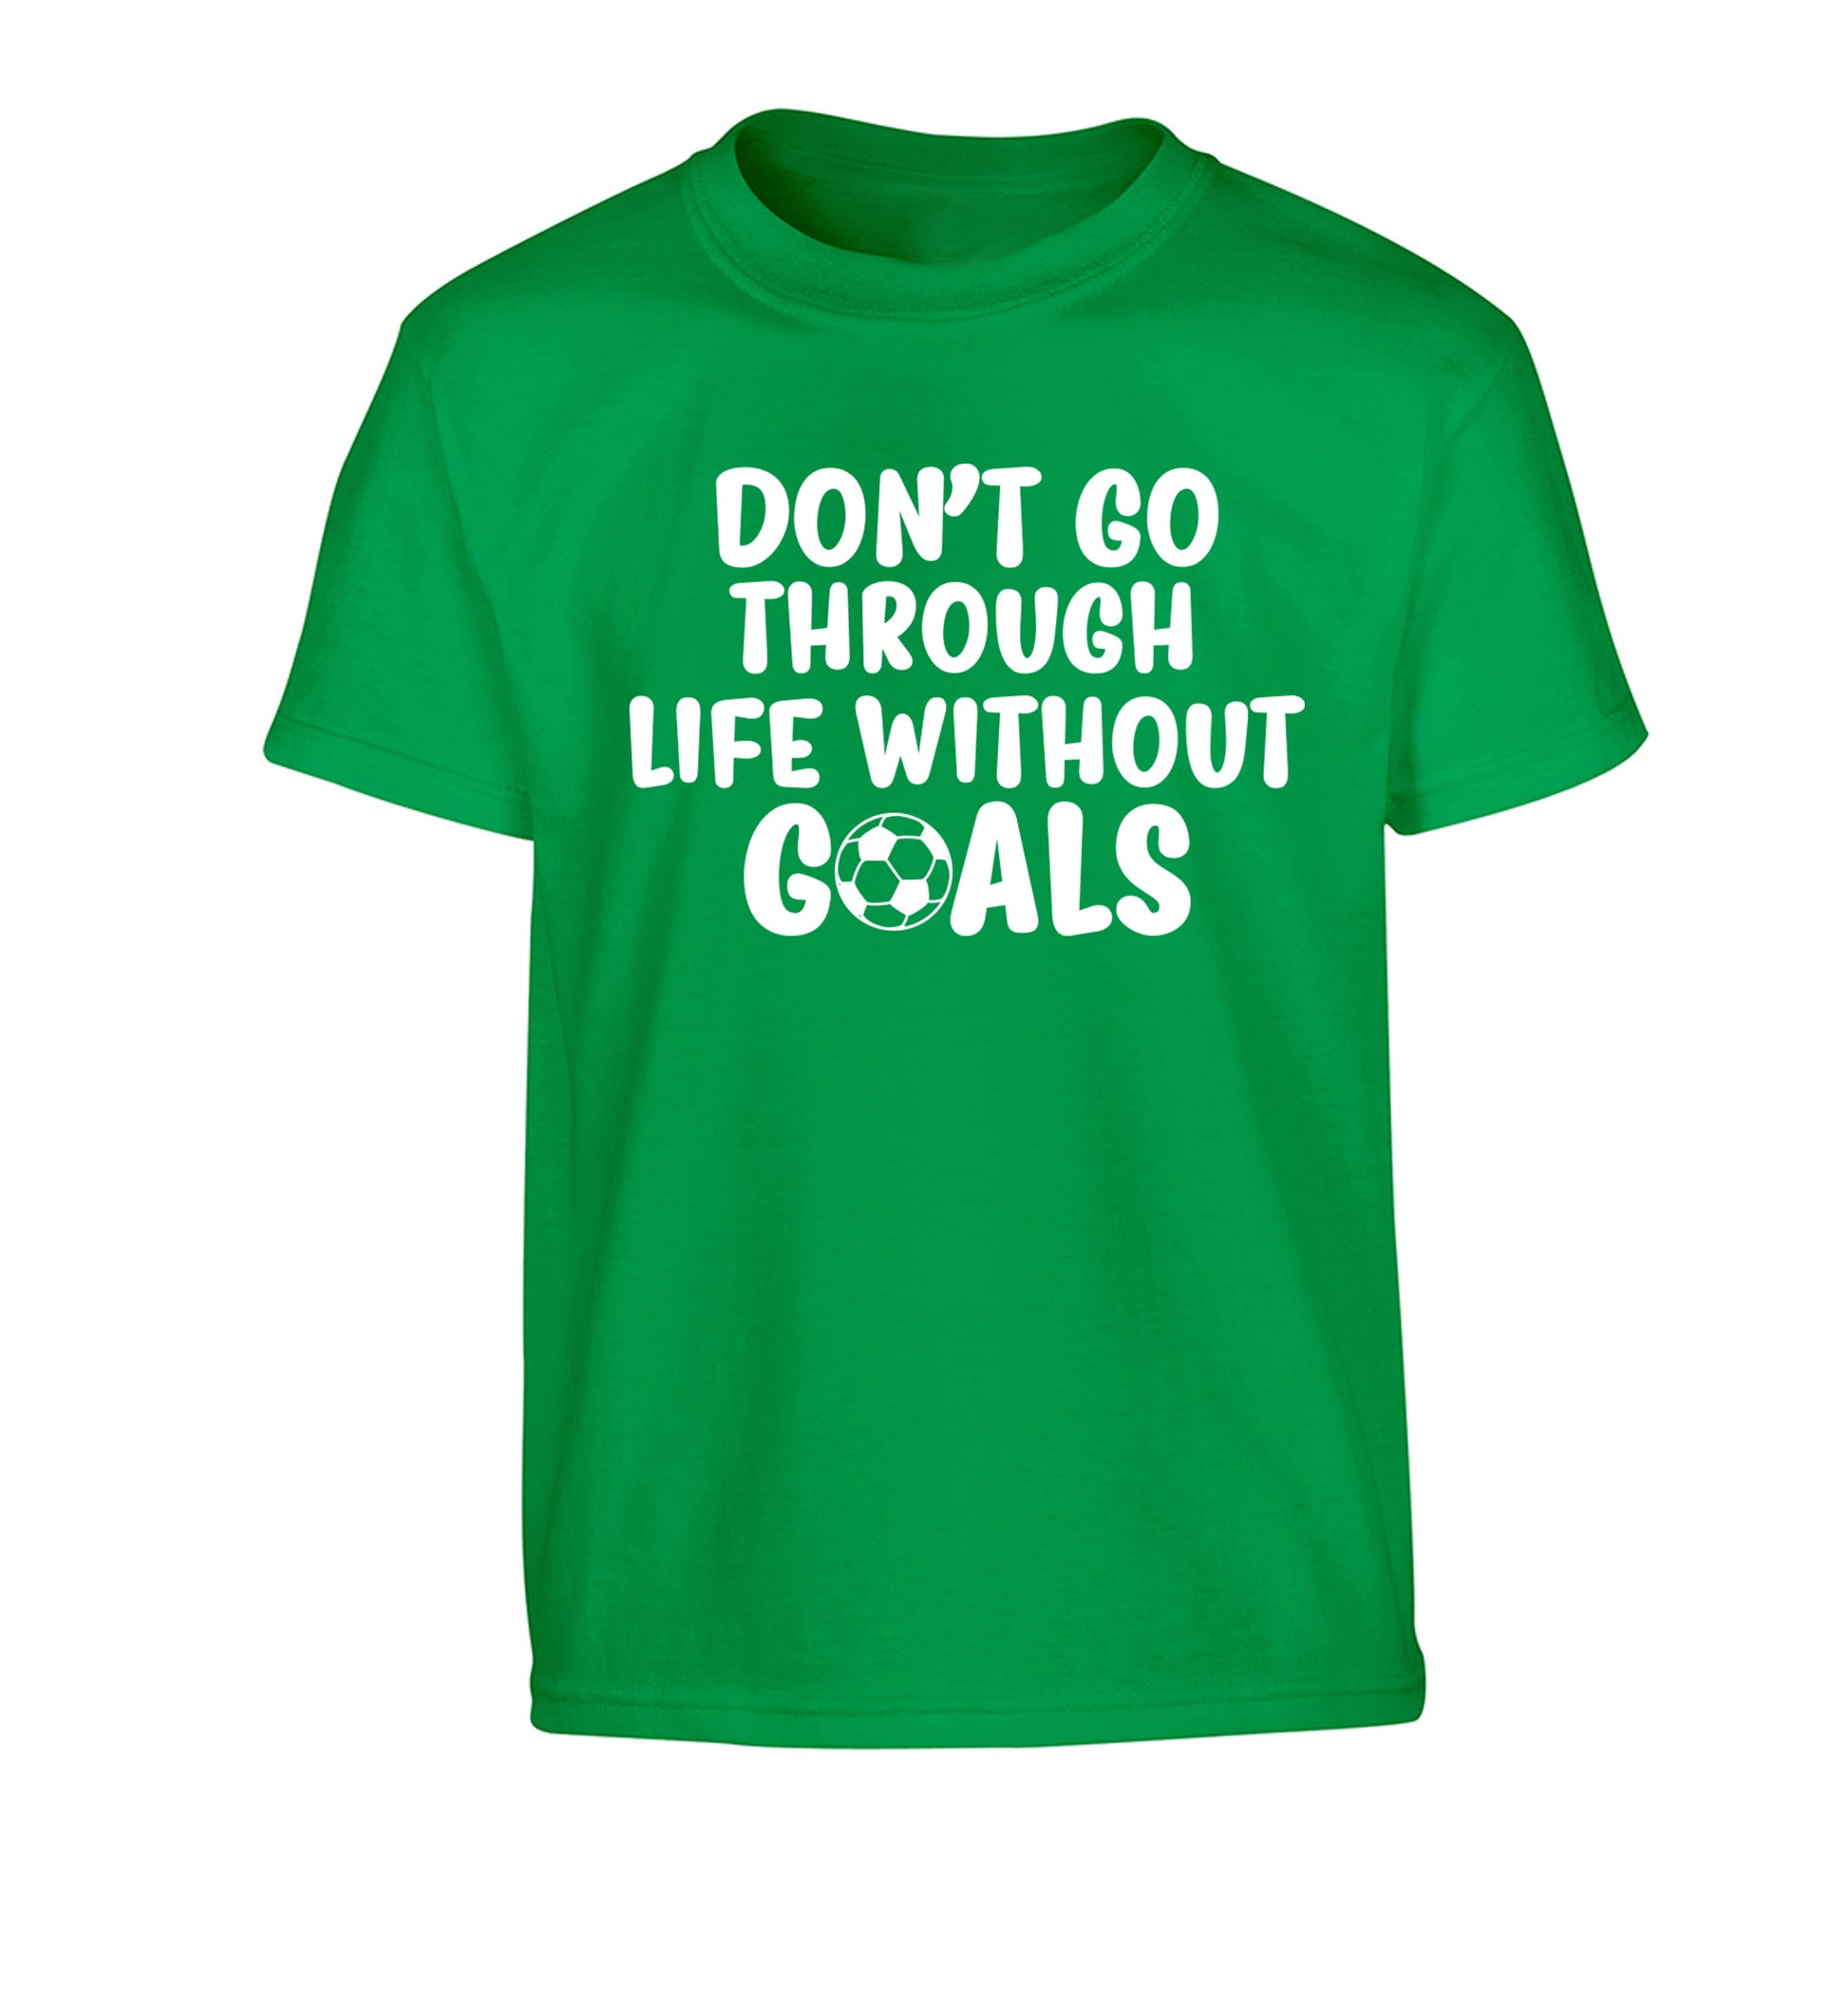 Don't go through life without goals Children's green Tshirt 12-14 Years